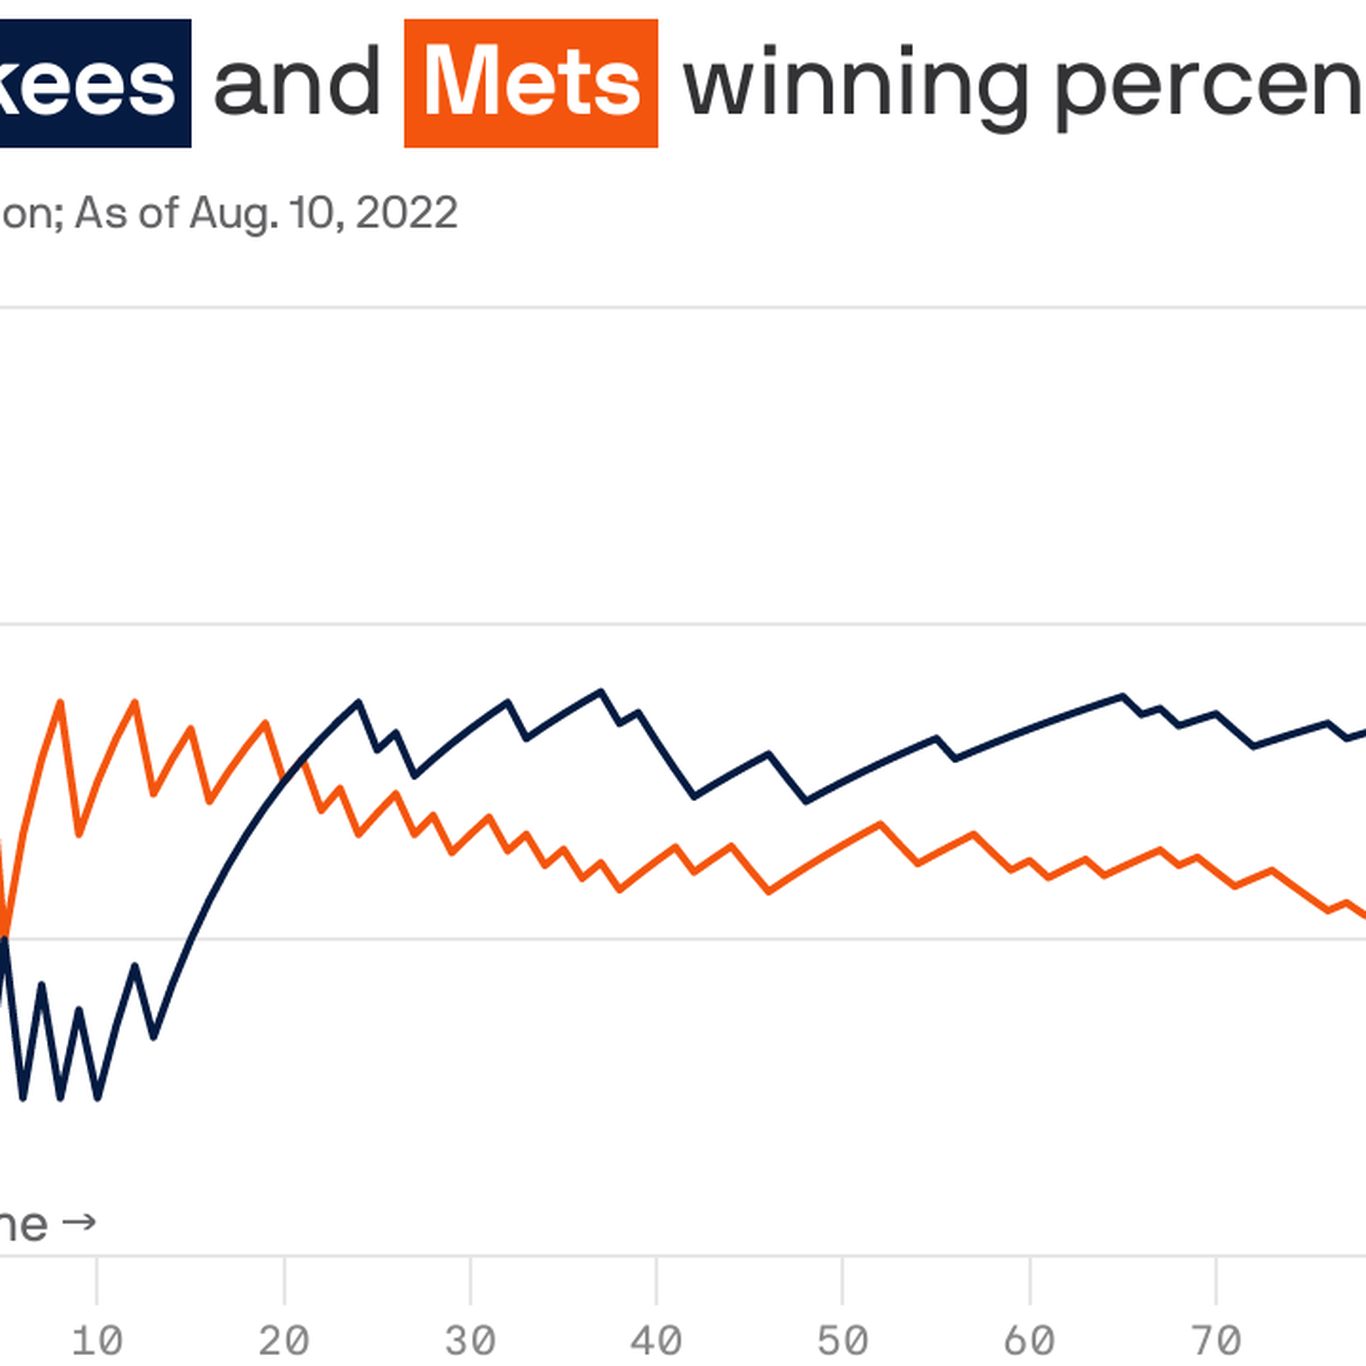 Facebook Data Shows Even in Queens, Yankees Are Favored over Mets